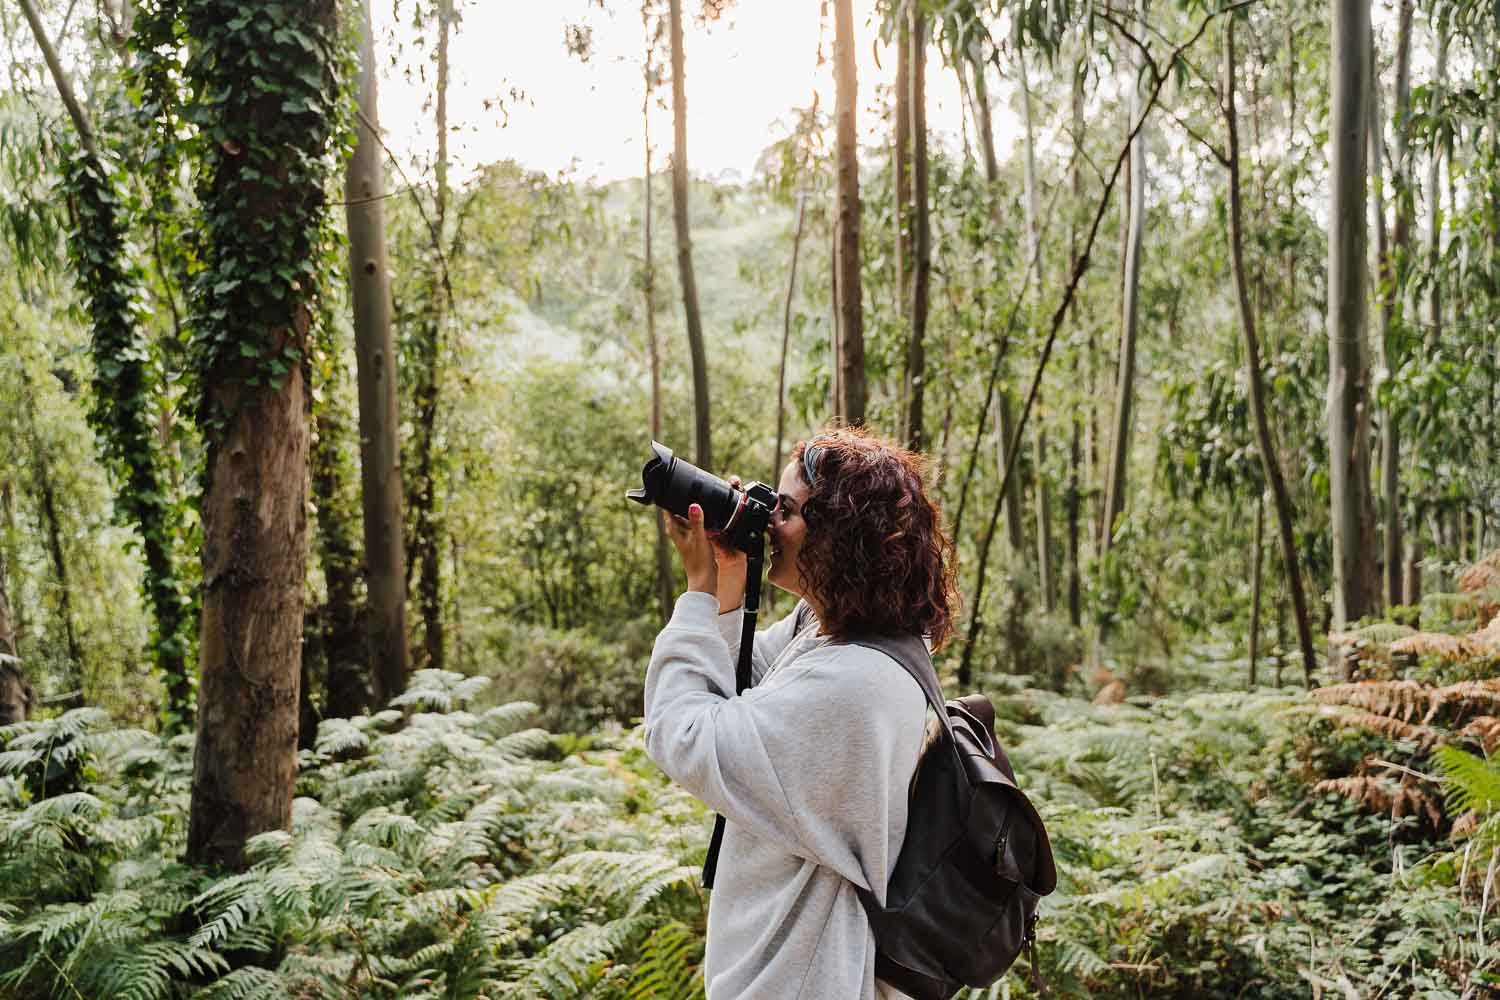 A person with binoculars observing nature in a lush forest.